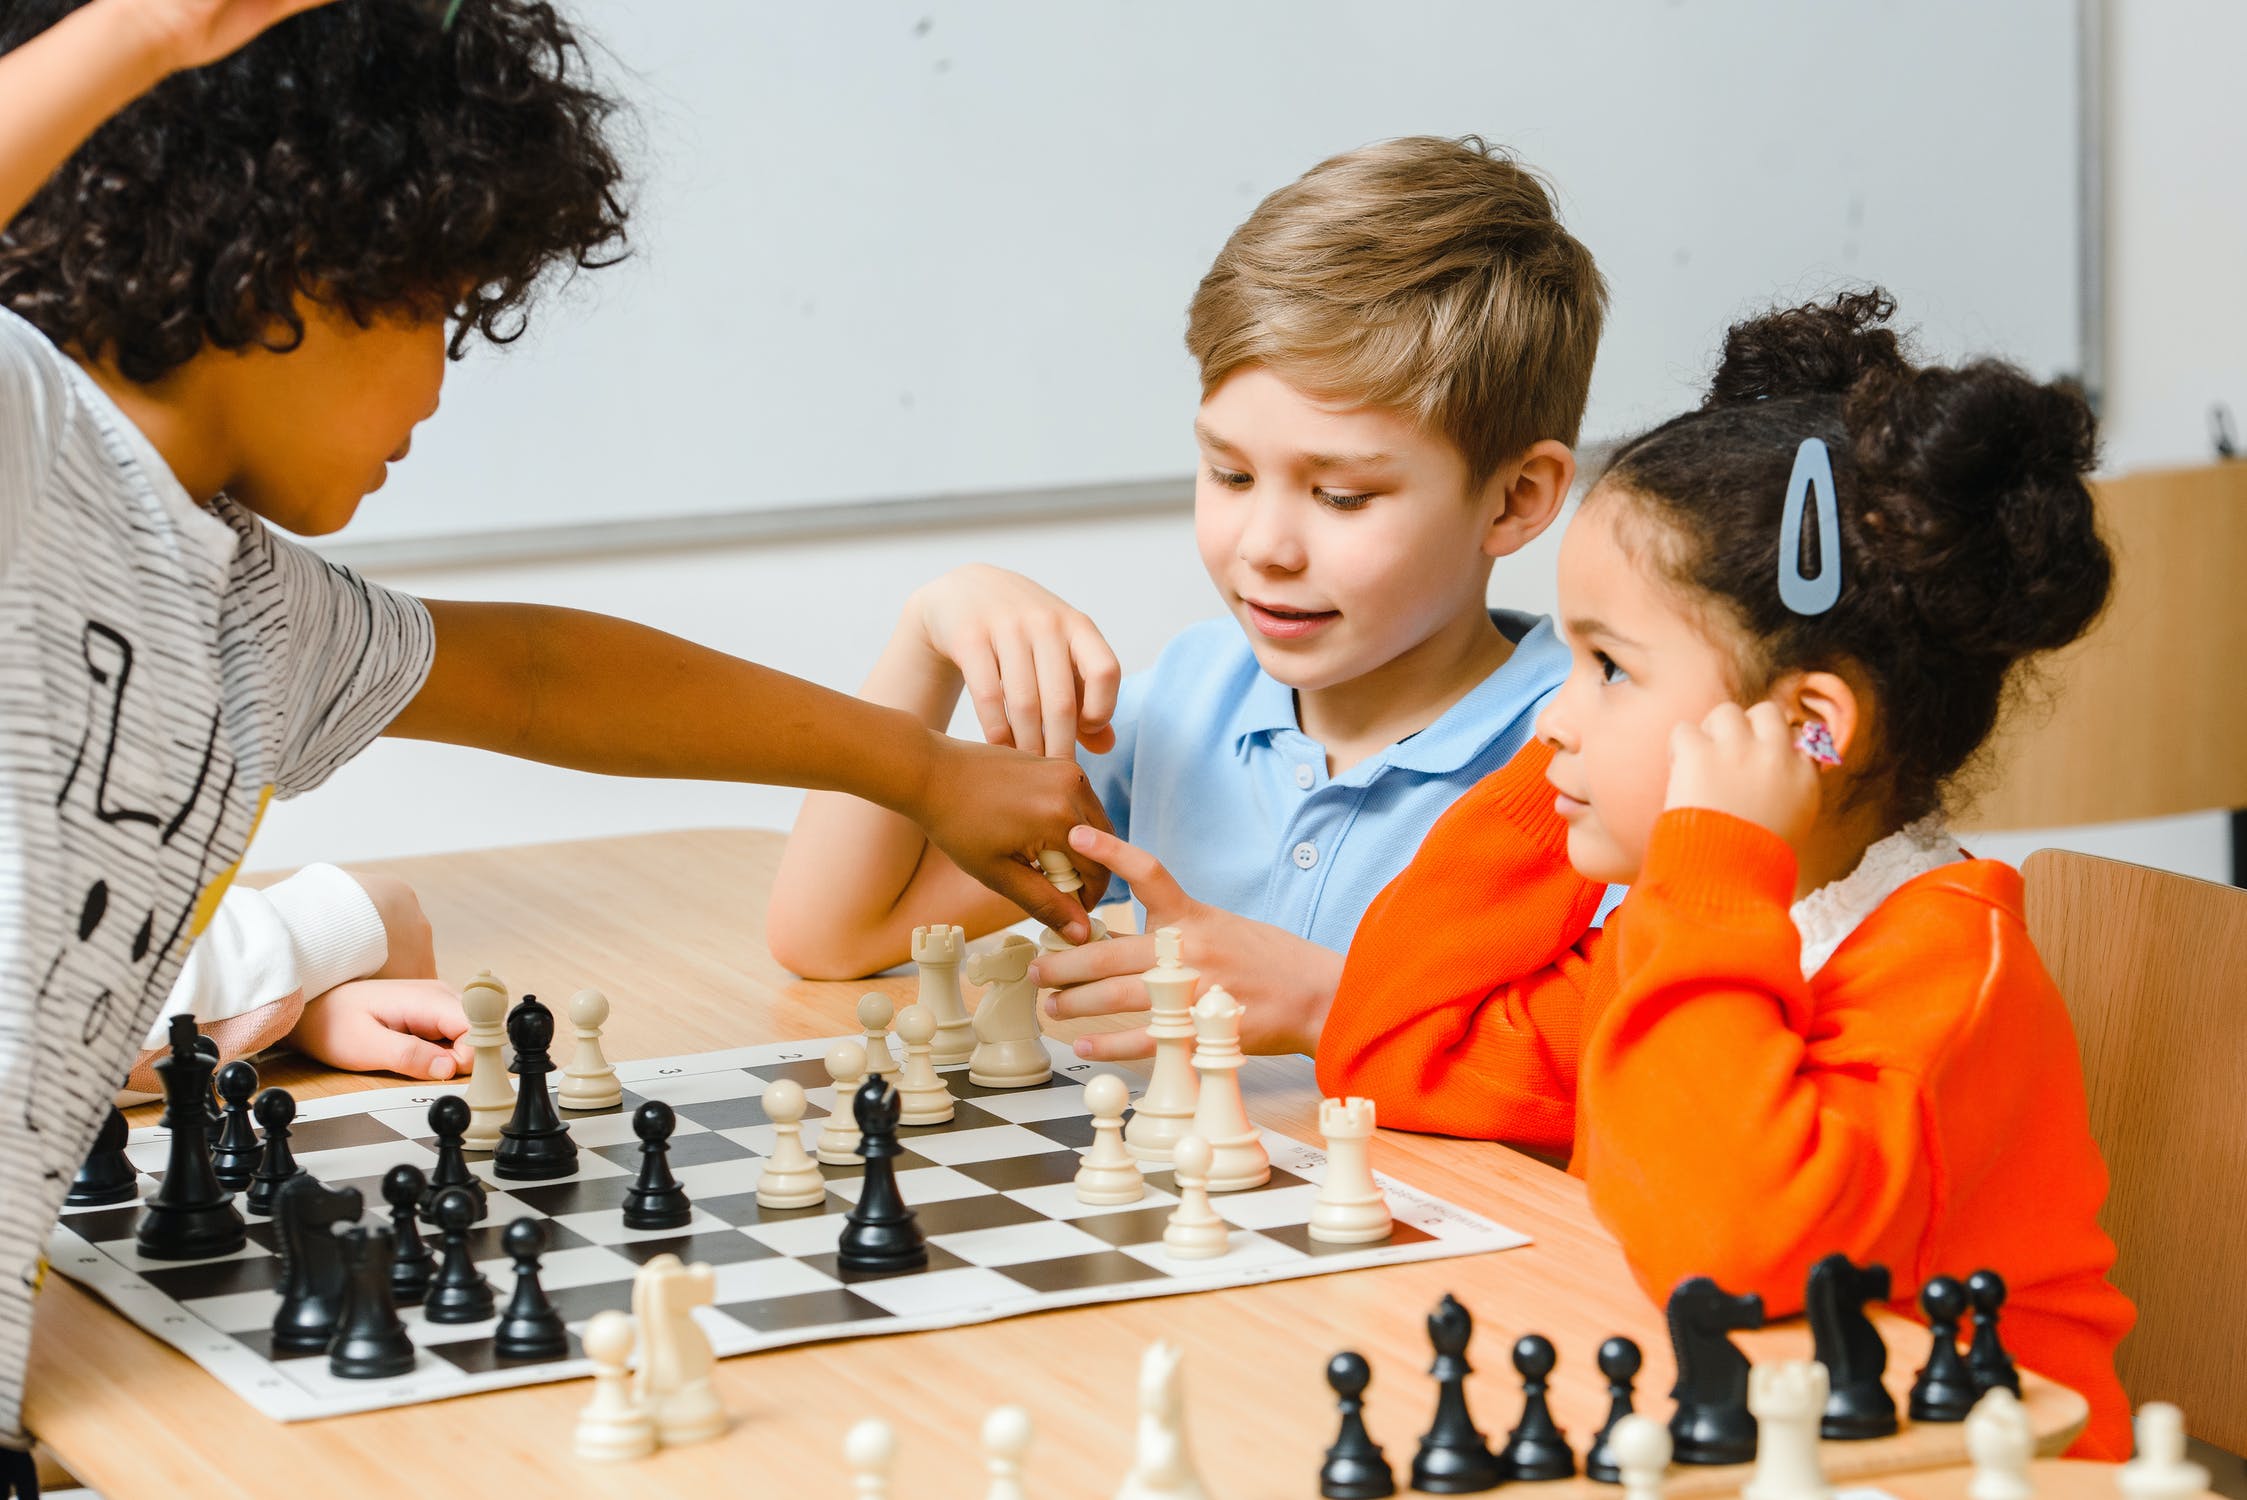 learning chess at young age - Online Chess Coaching